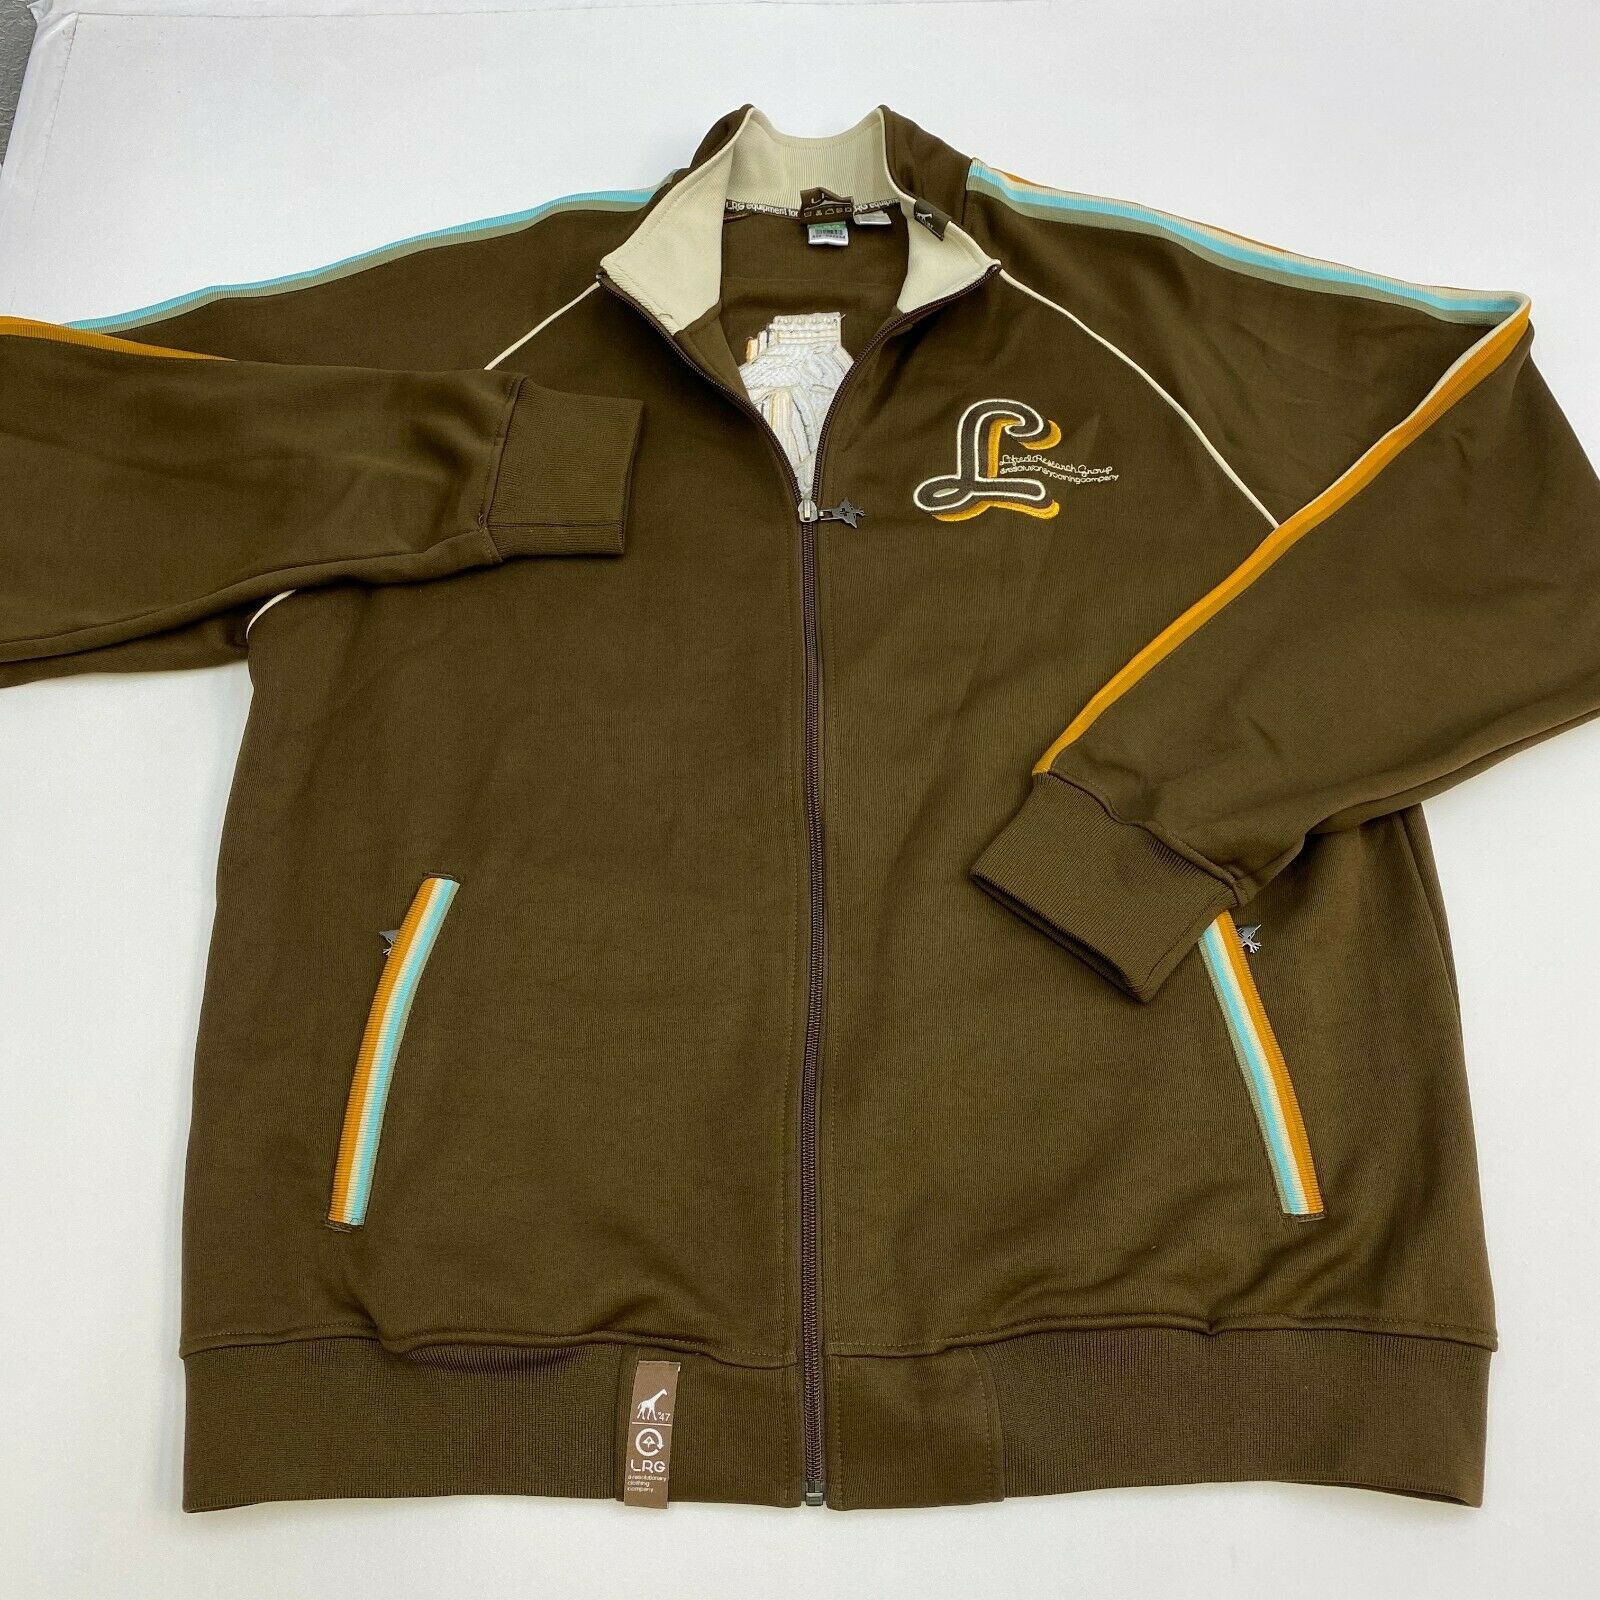 the lifted research group jacket